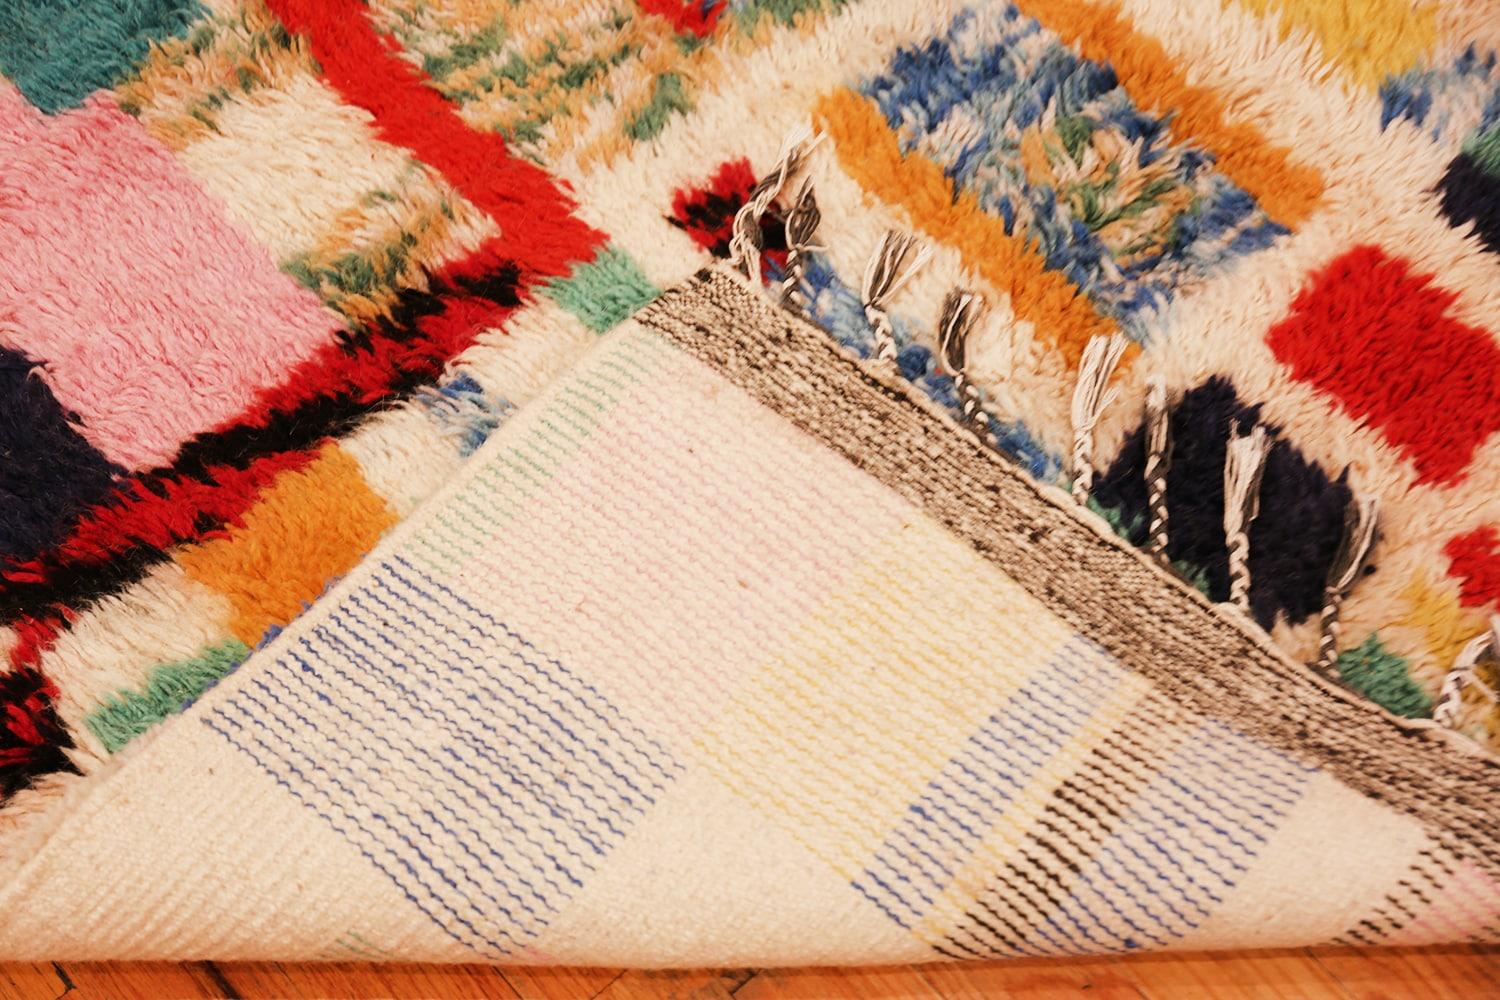 Colorful and funky vintage Swedish Rya Shag rug, Country of origin: Sweden, date circa mid-20th century. Size: 5 ft x 6 ft 4 in (1.52 m x 1.93 m)

